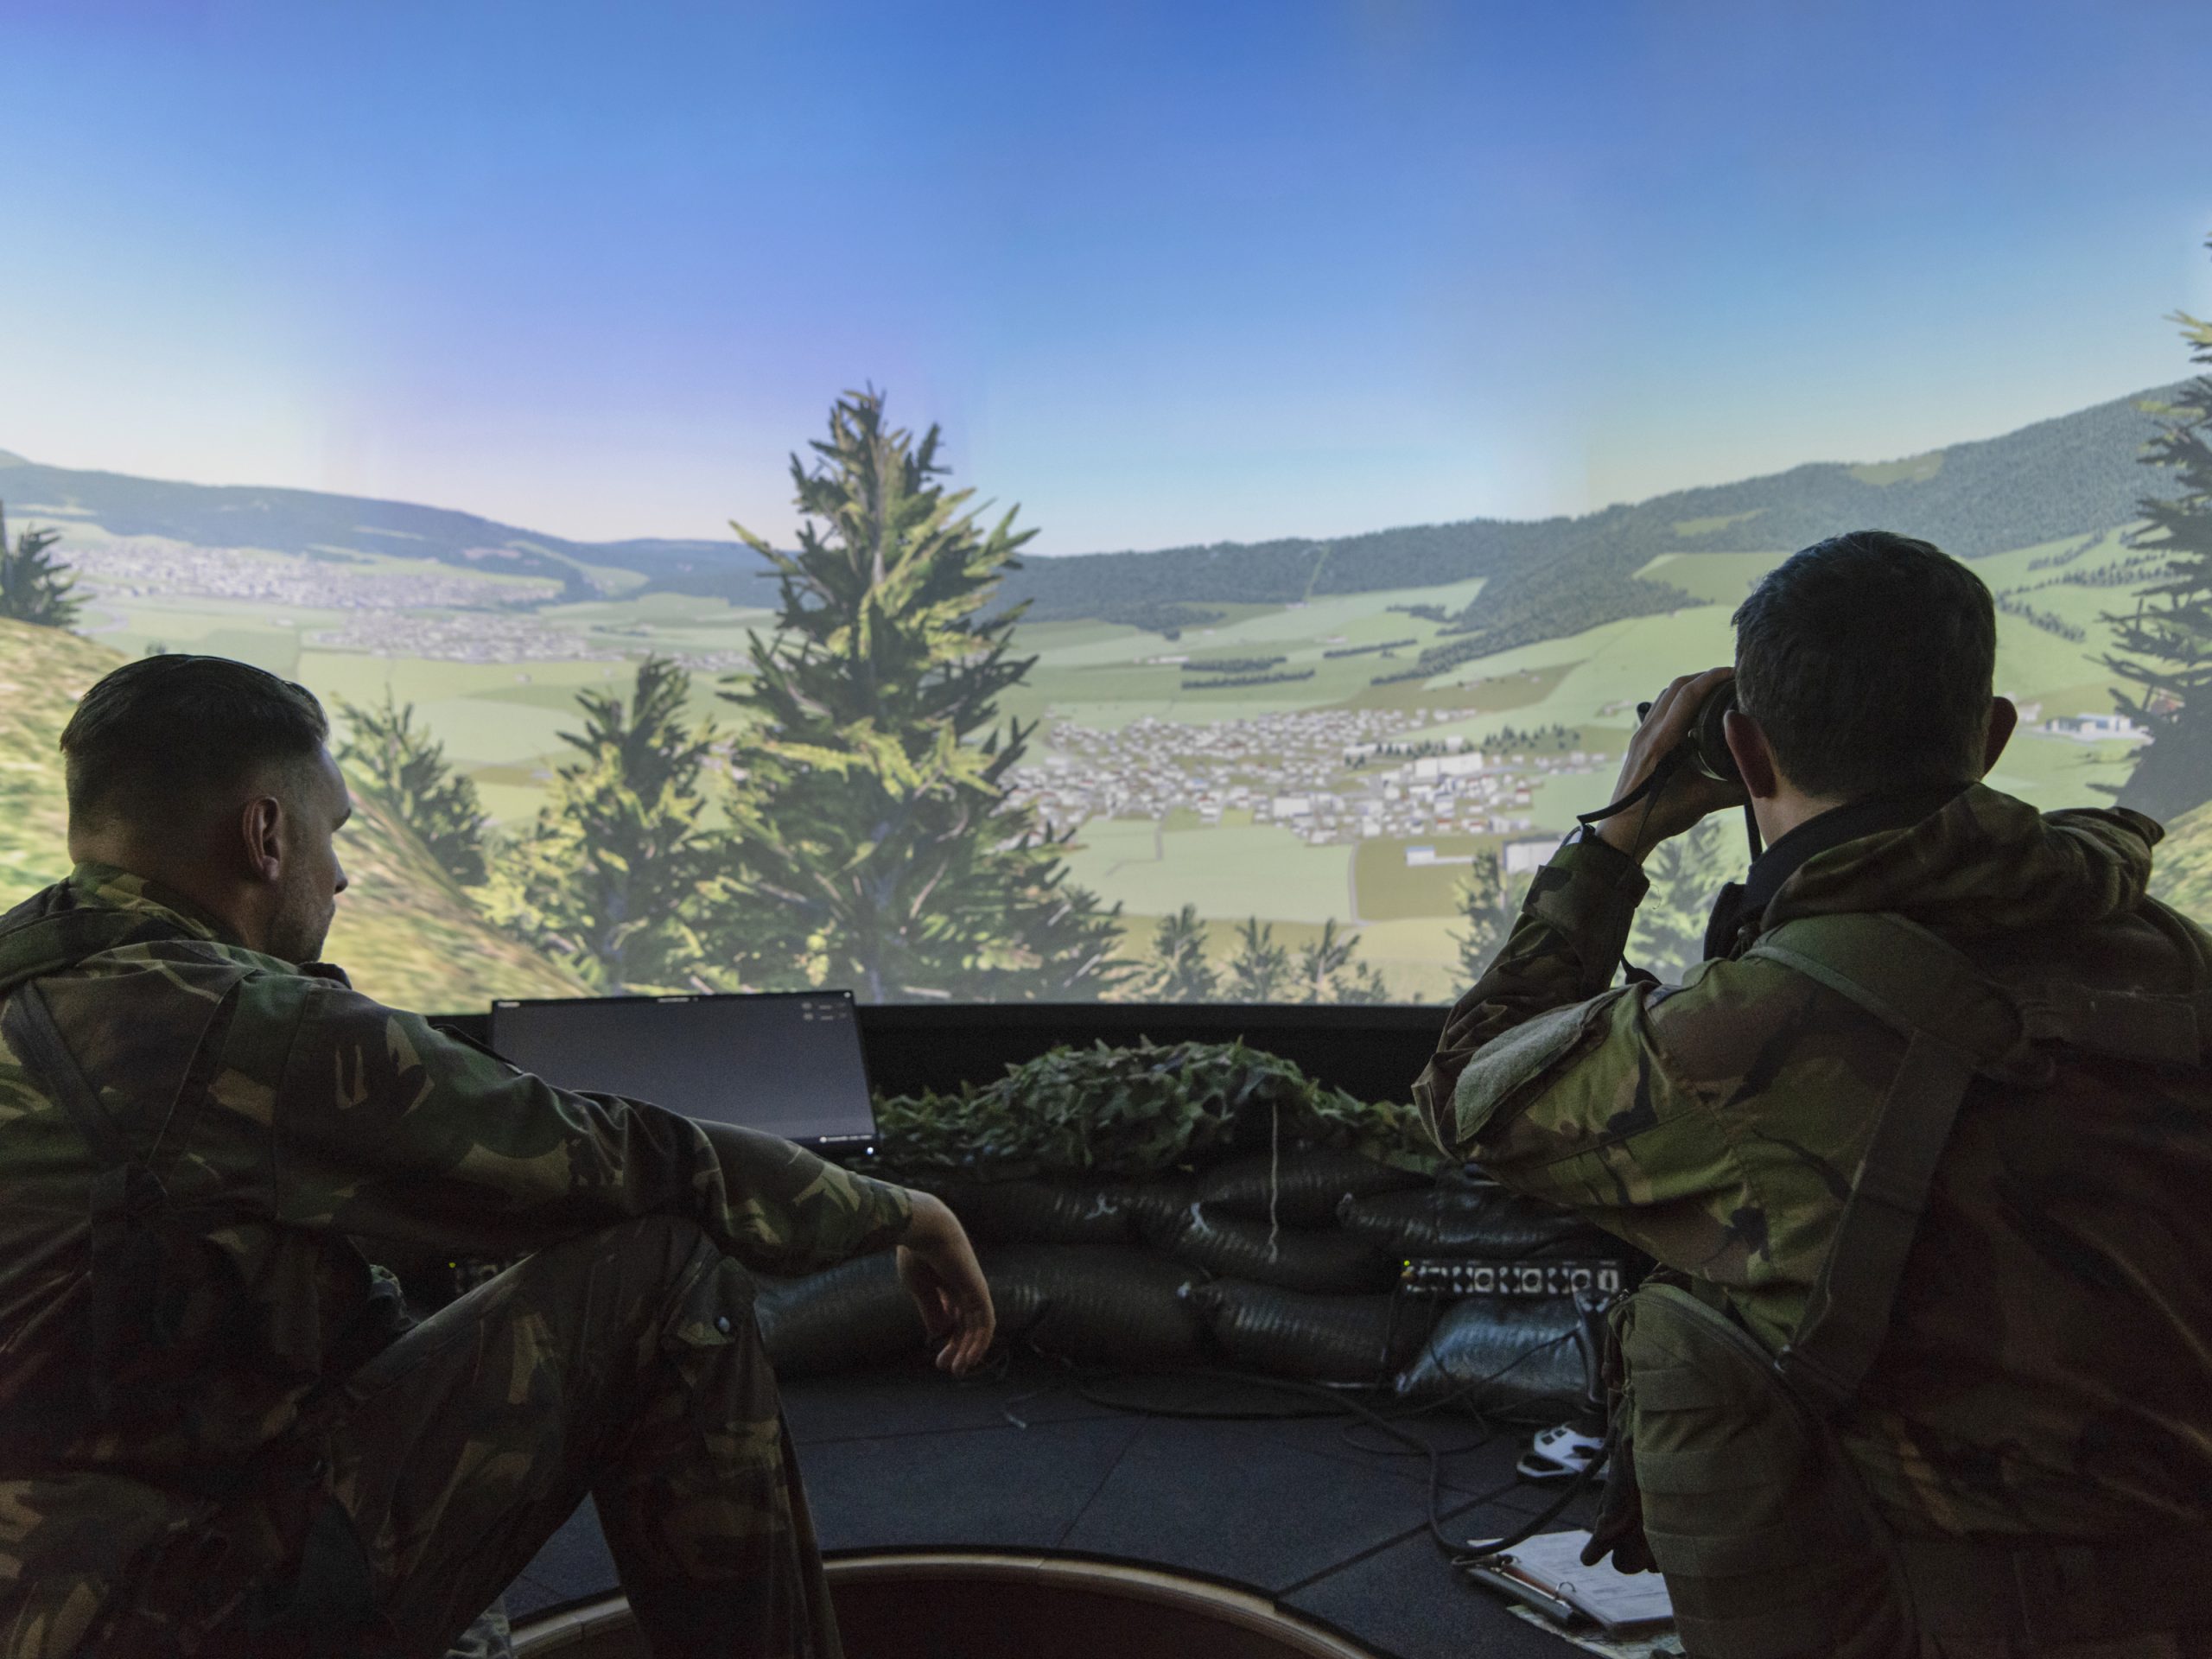 <p>The system presents a realistic battlespace arena using Bagira’s B-One Simulation and high-resolution 4M Dome display systems.</p>
